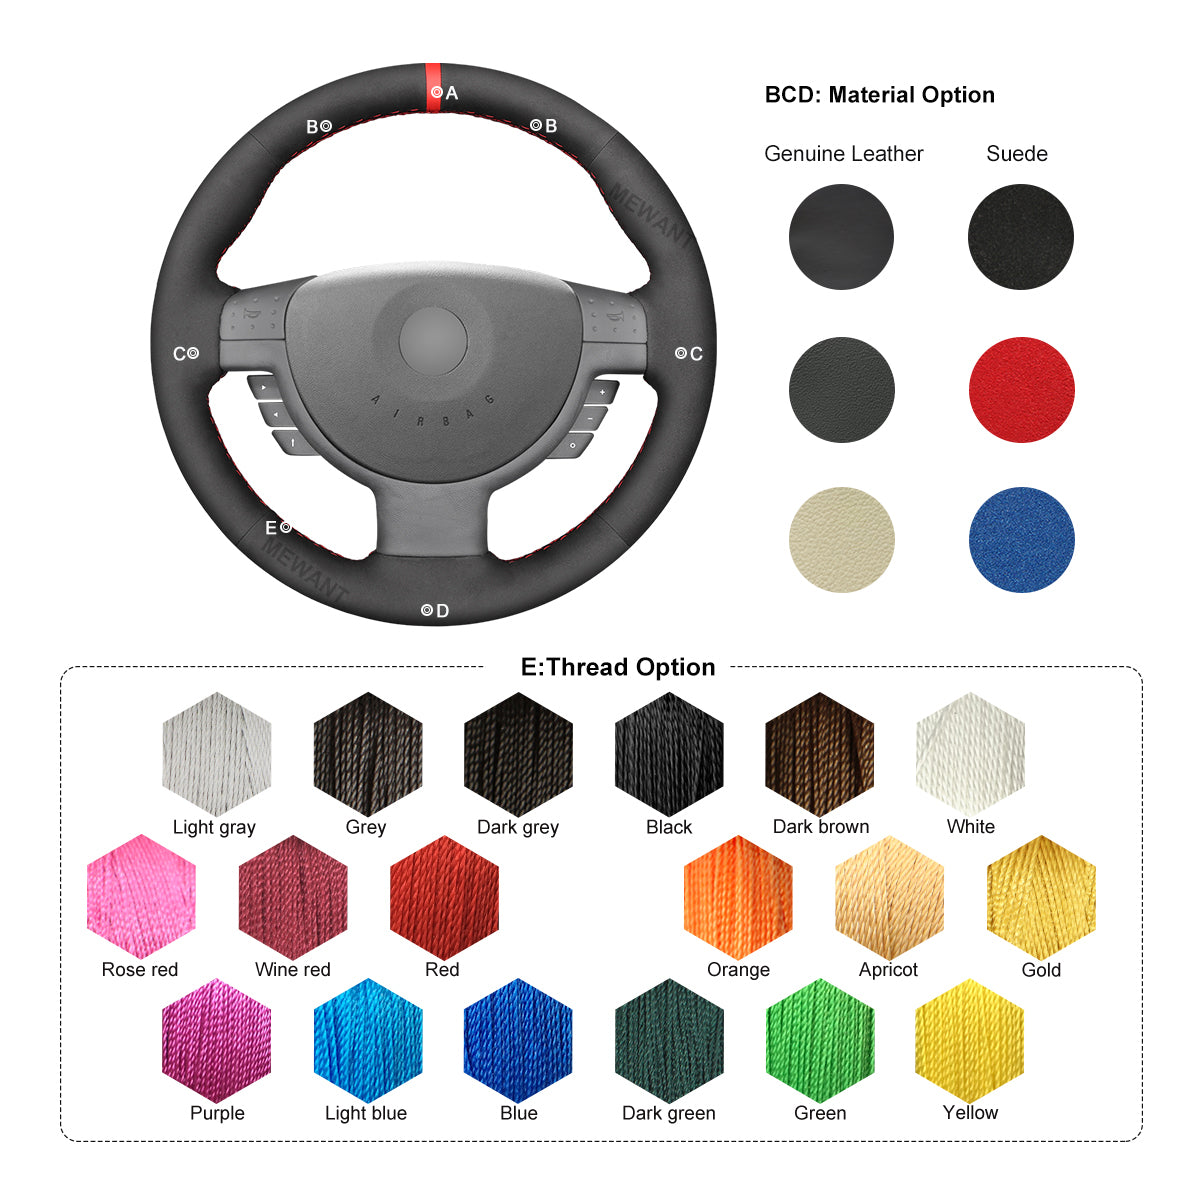 MEWANT DIY Leather Suede Car Steering Wheel Cover for Opel Corsa C Combo C Vauxhall Corsa C Holden Barina Tigra